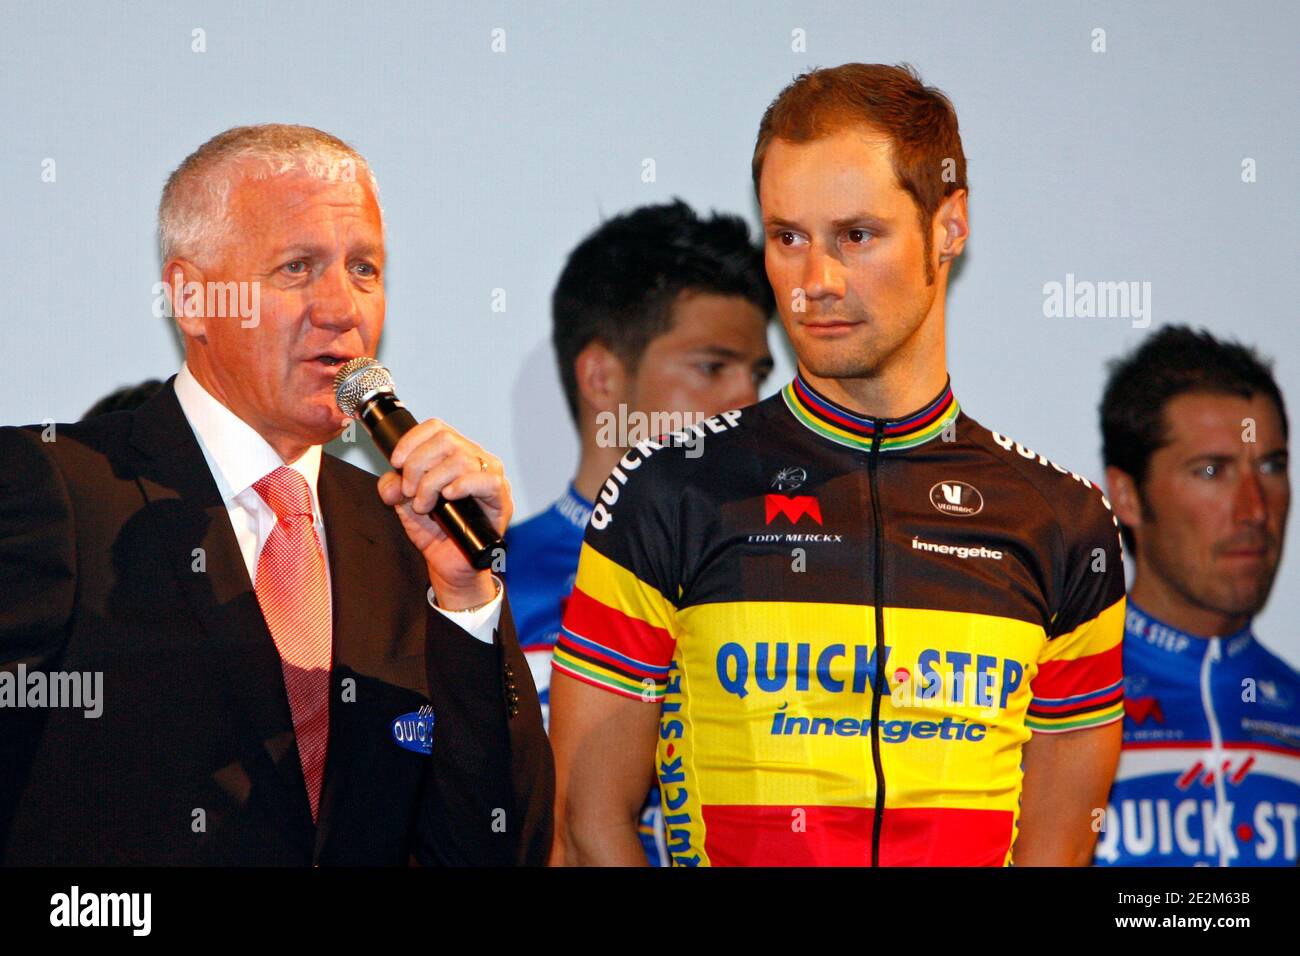 Team manager Patrick Lefevere (L) and team leader Tom Boonen during the presentation of the belgian Quick Step cycling team for 2010 season in Courtrai, Belgium on january 22, 2010. Photo by Mikael LIbert/ABACAPRESS.COM Stock Photo